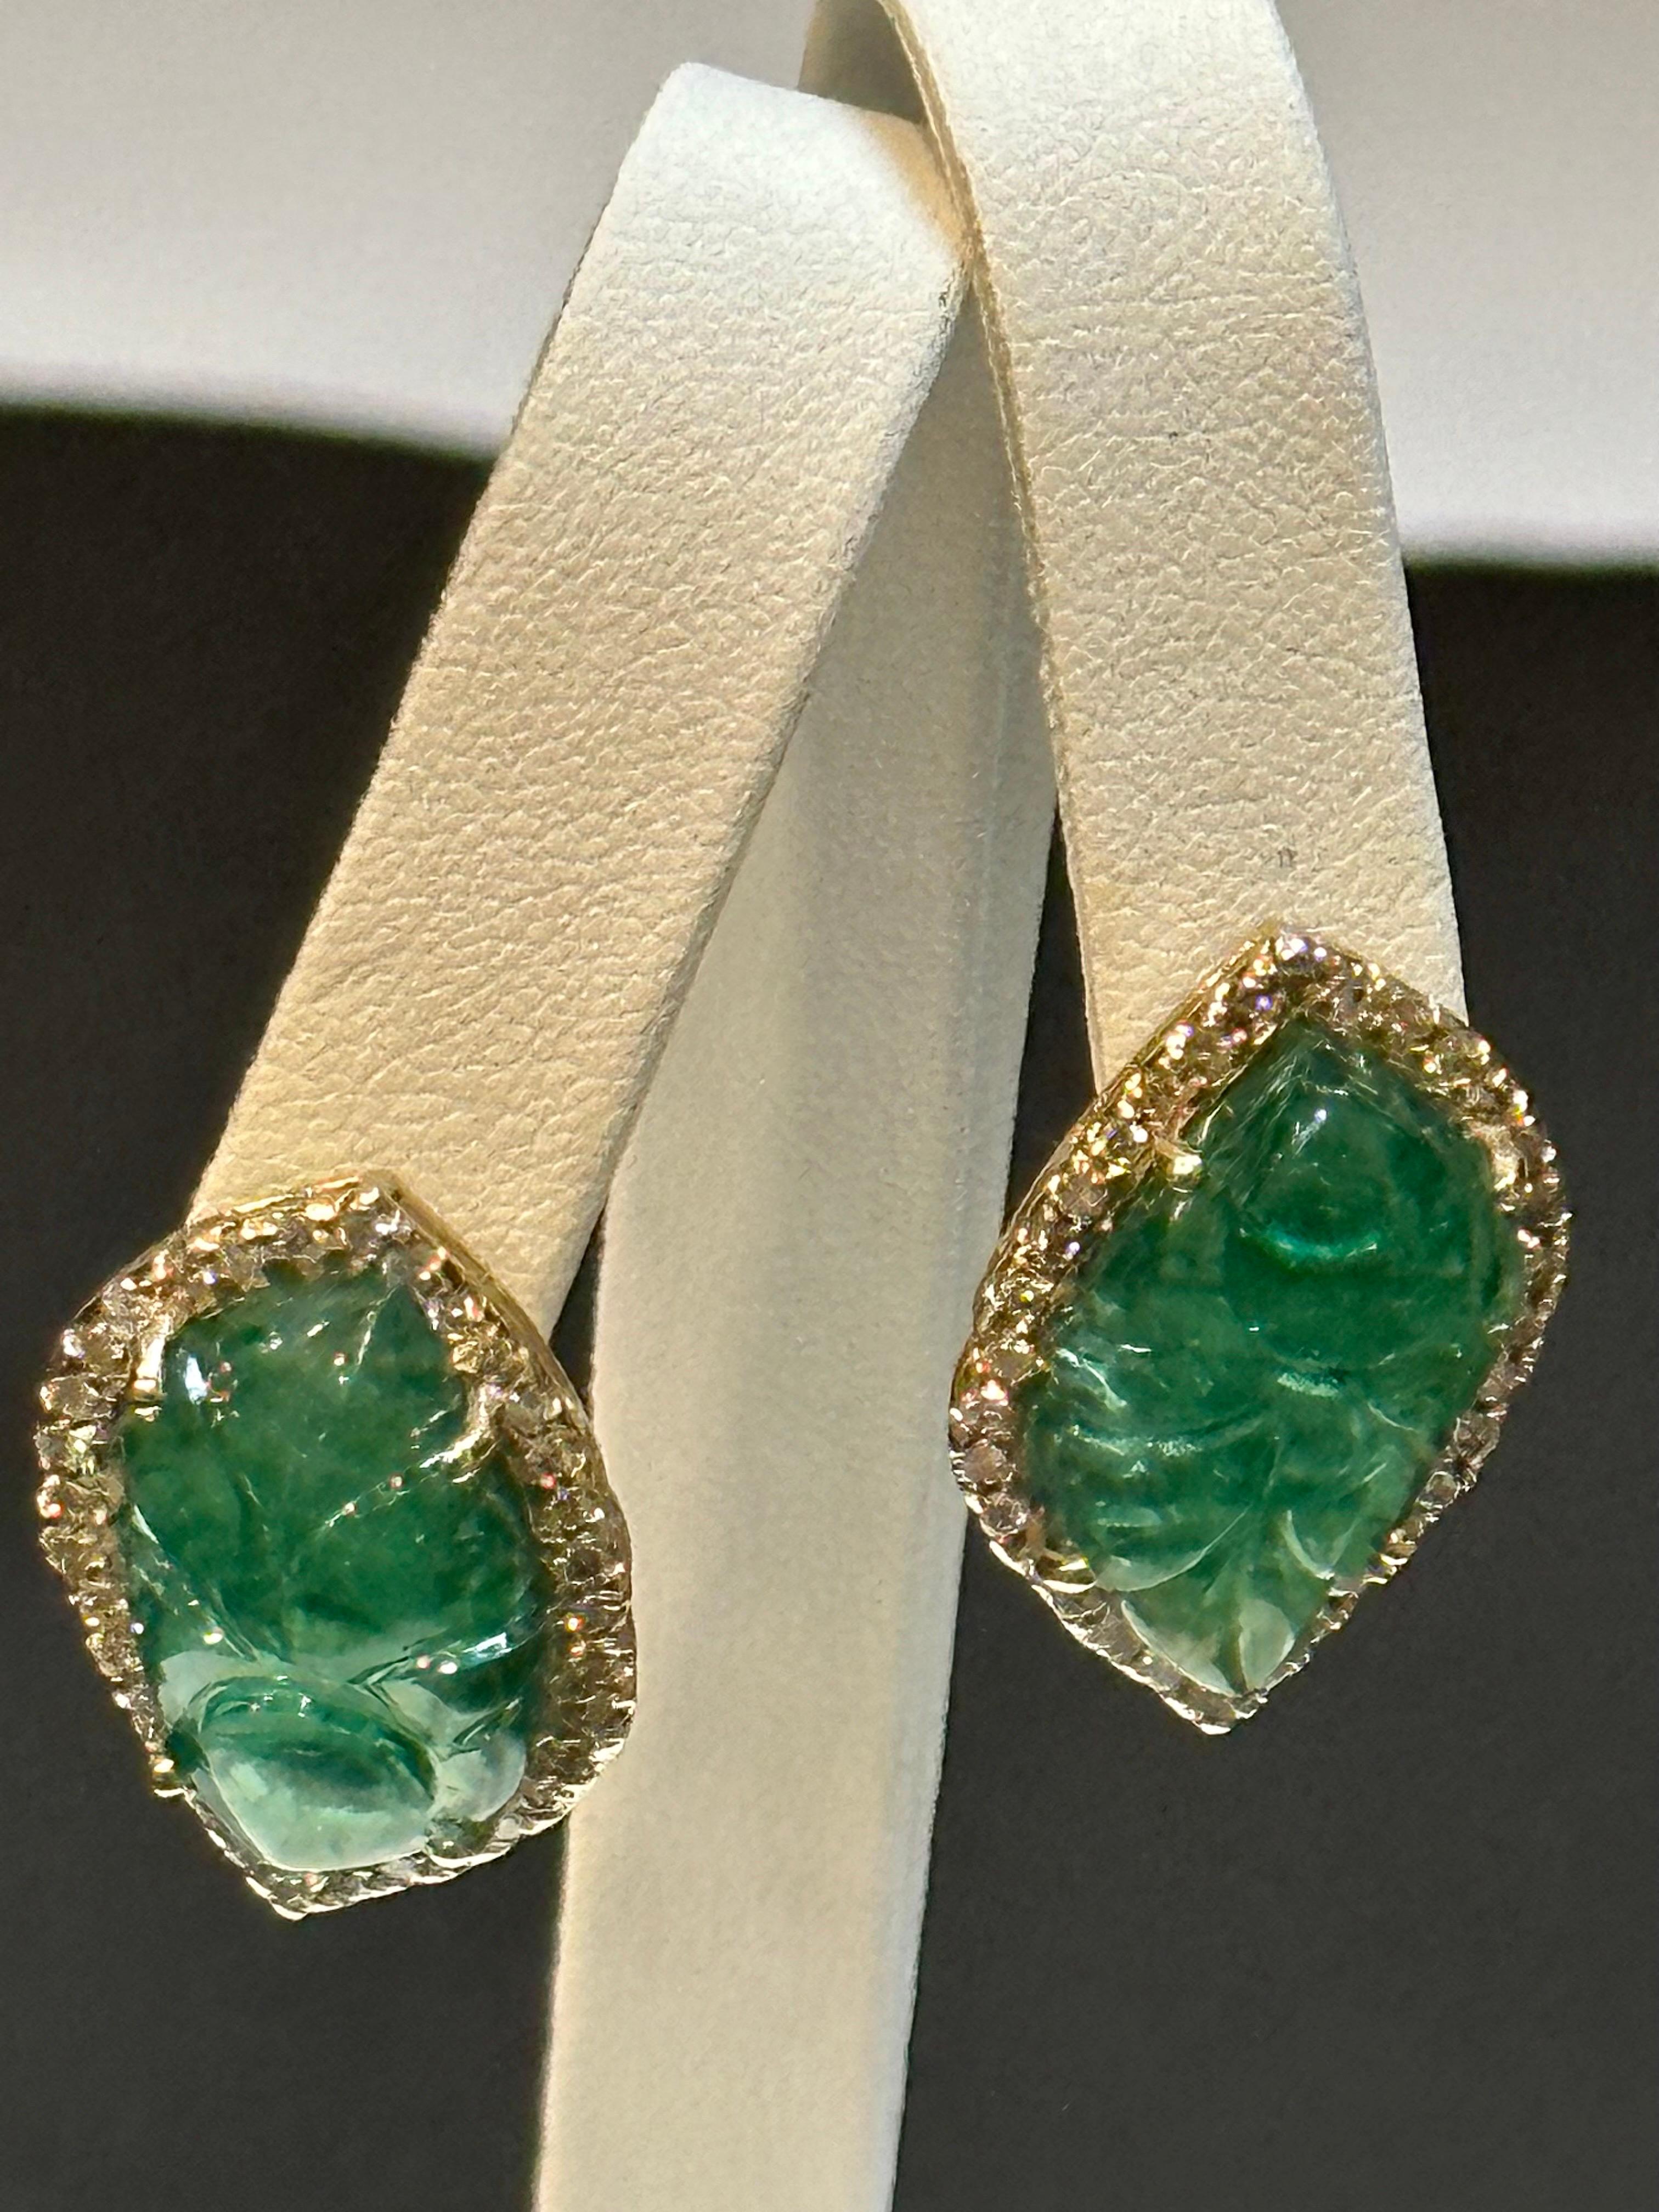 Known weight of 21.90  Ct Carved Emerald  &  2 Ct Diamond Earrings 14 Karat Yellow Gold Post Earrings

 Emerald  Diamond  Post  Earrings  14 Karat  Yellow Gold 
Two fine carved  leaf emeralds of total 21.90 ct  exact known weight
Emeralds are